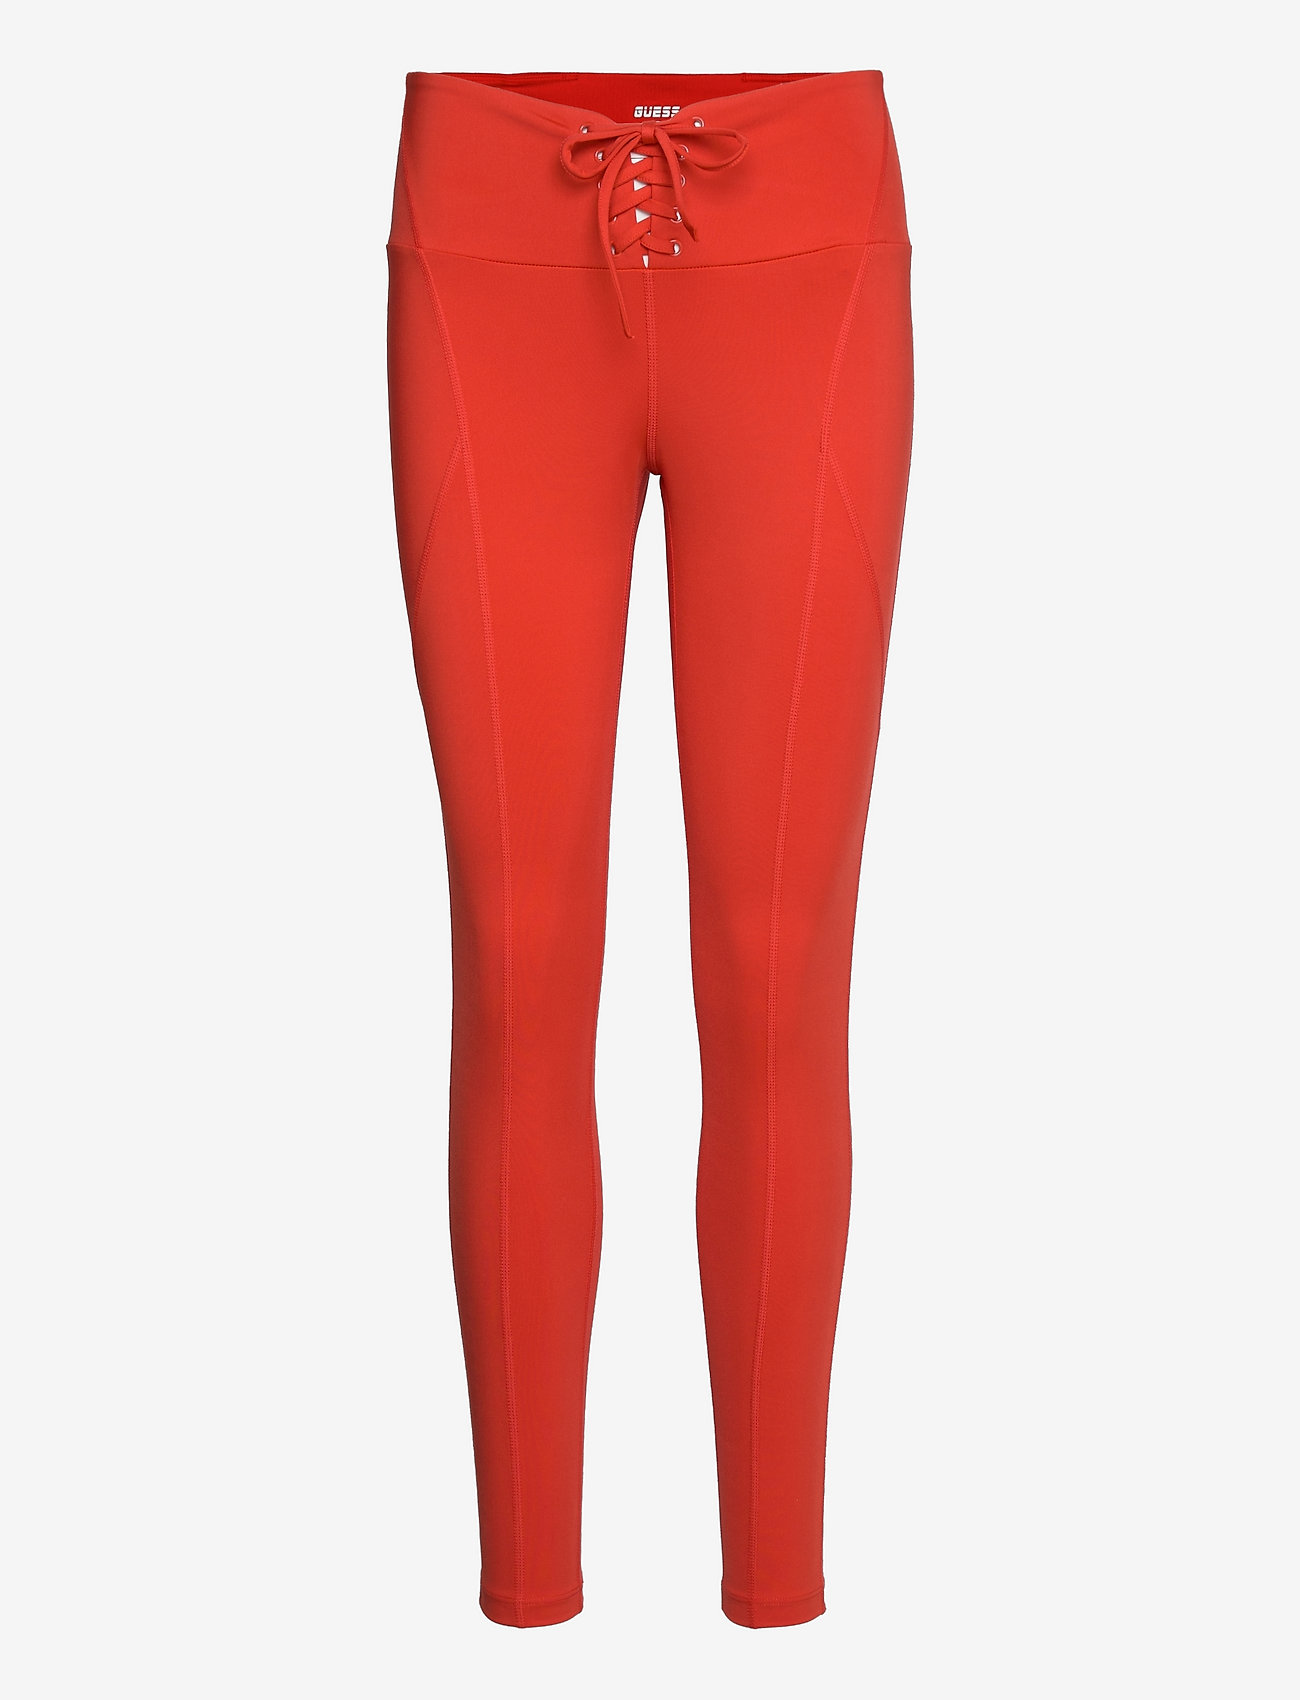 Guess Activewear - AGATHA LEGGINGS 4/4 - trænings- & løbetights - ardent red - 0